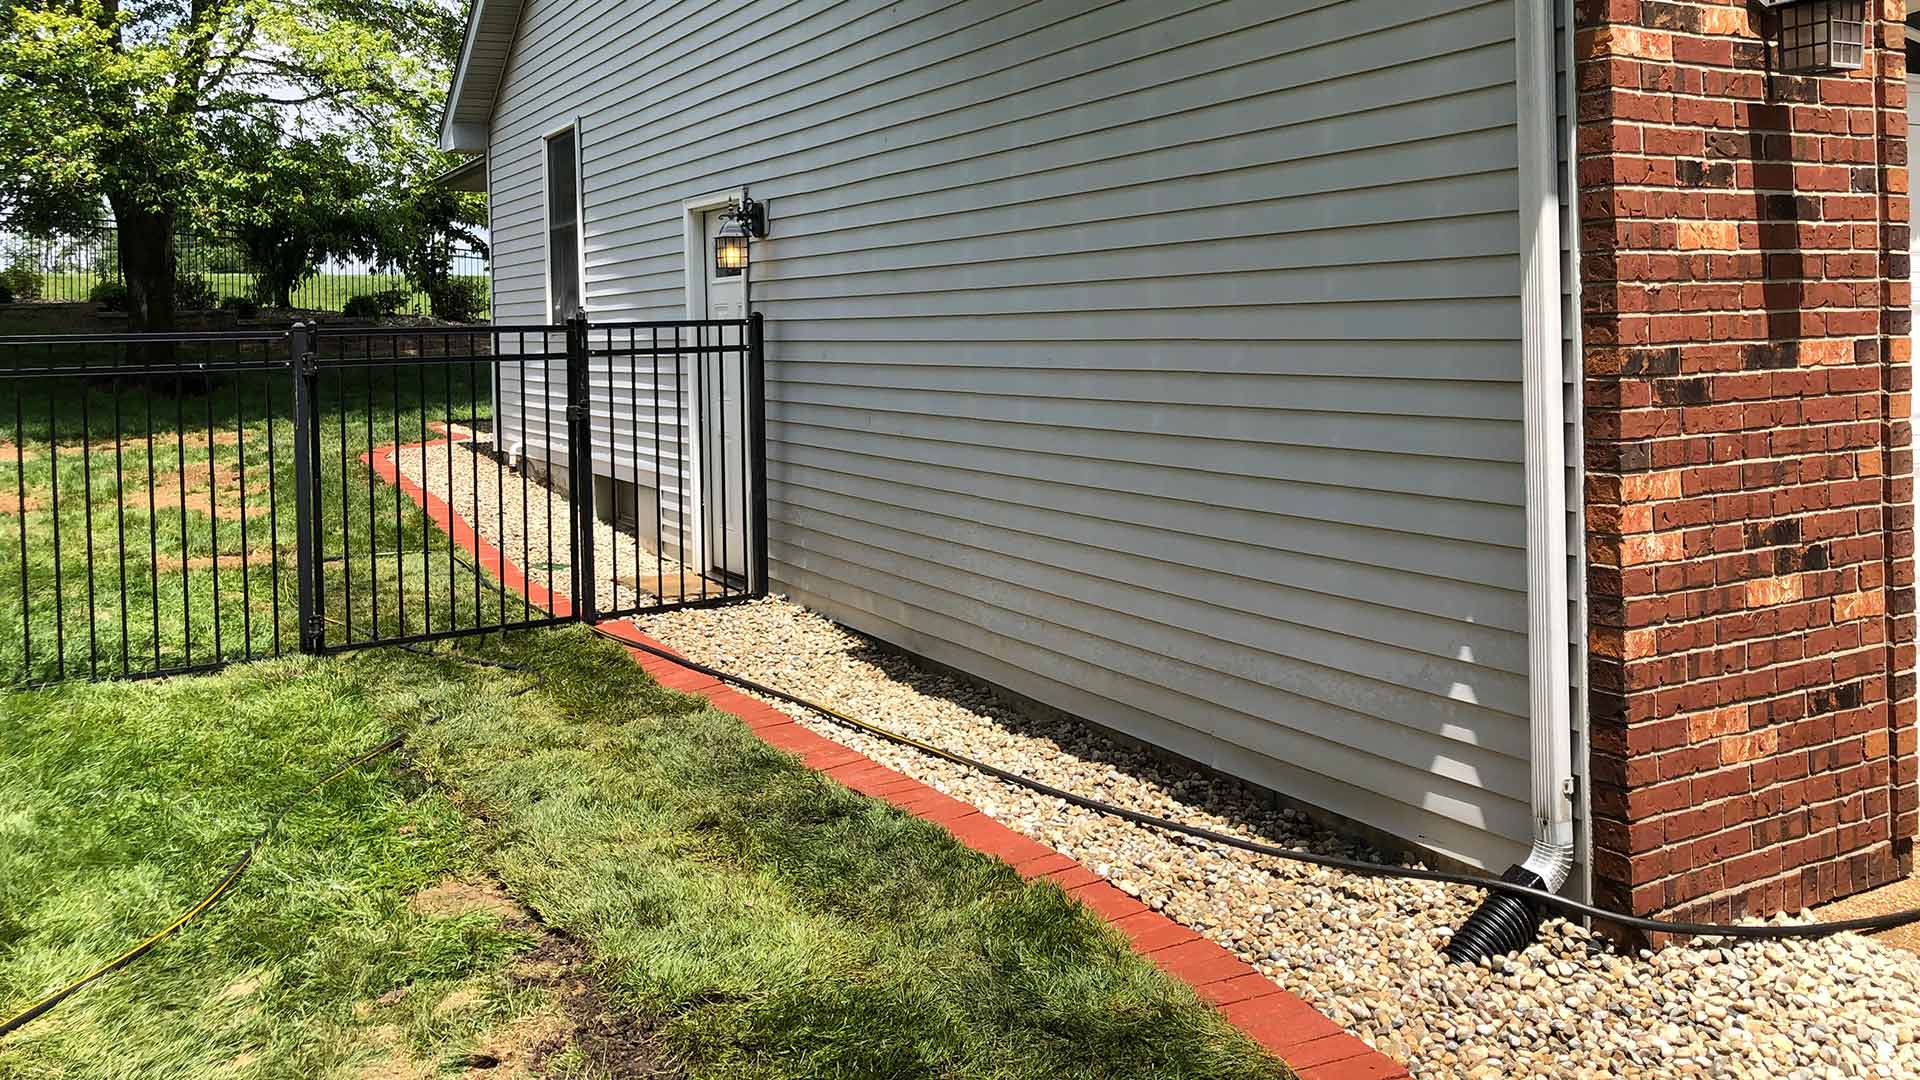 Drainage system installed at a home in Moro, Illinois.